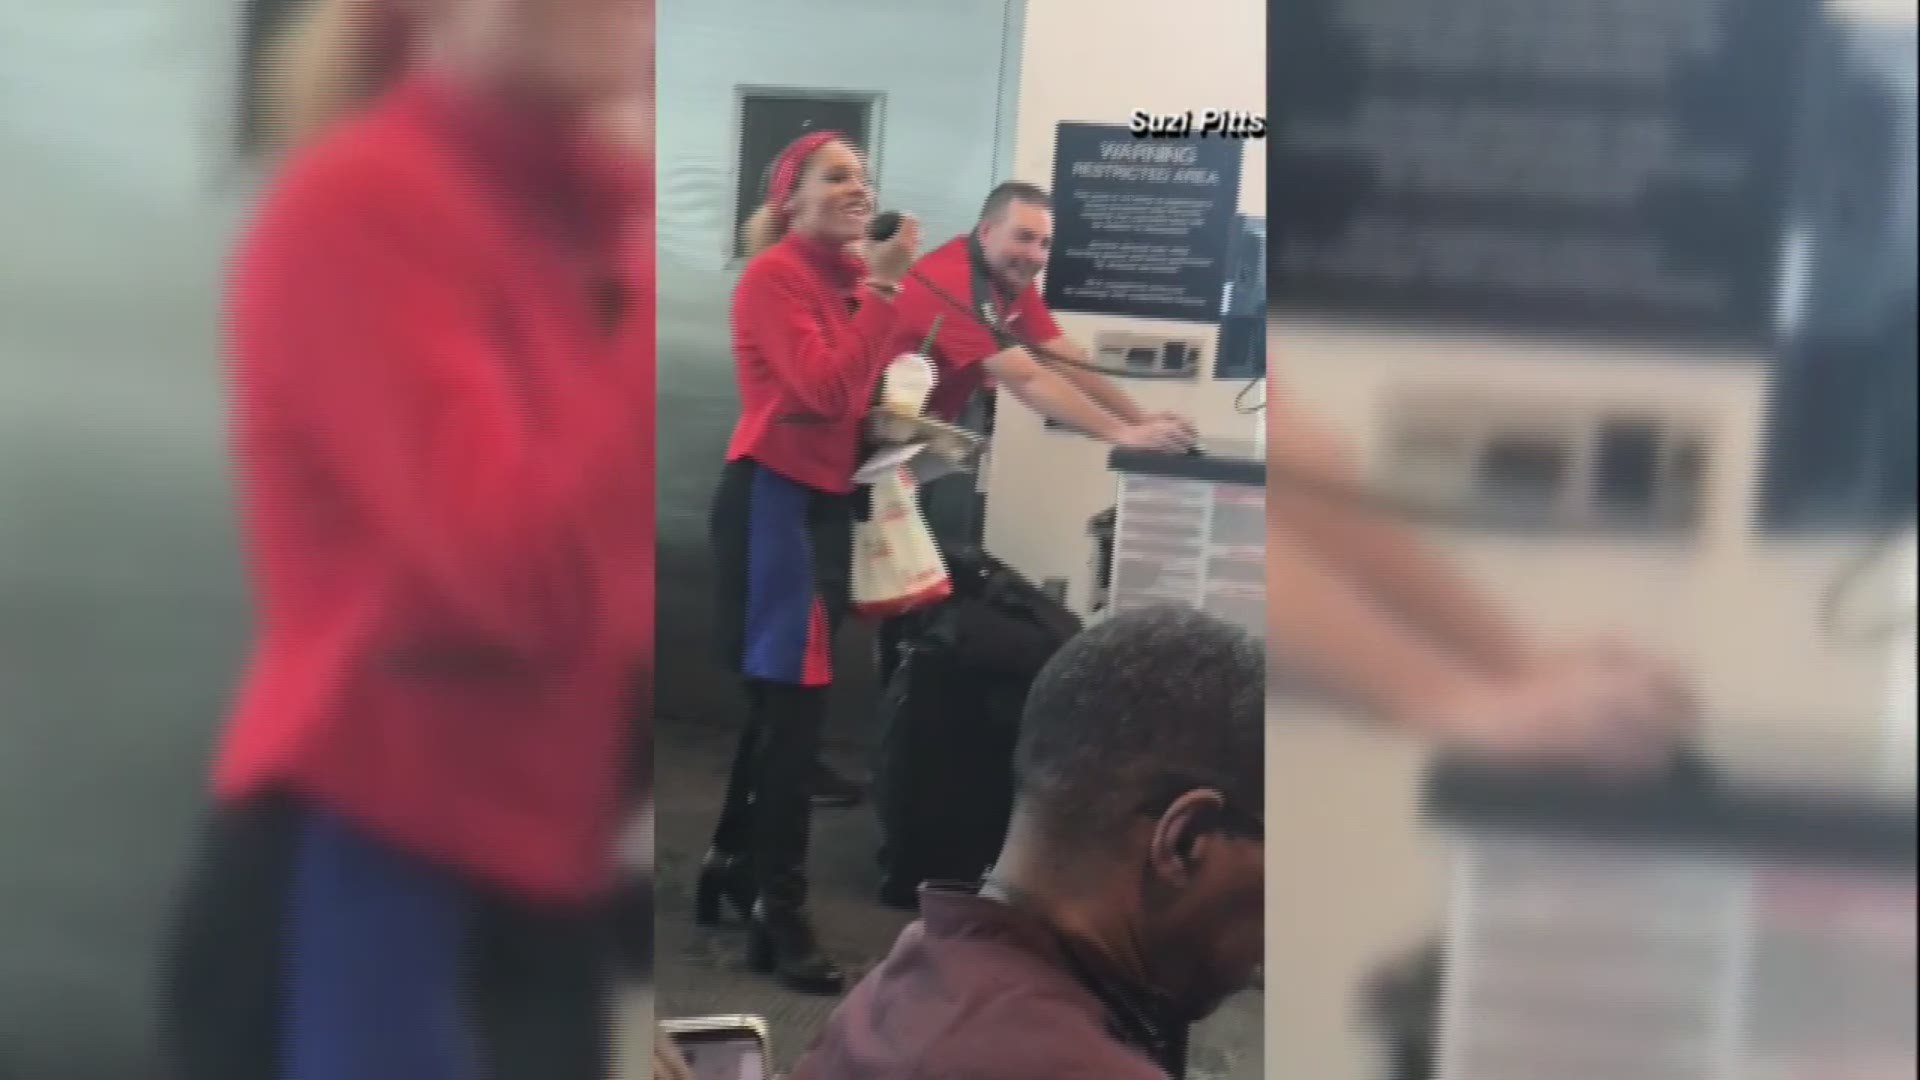 A Southwest Airlines flight attendant made holiday travel a little more enjoyable for some passengers with an impressive rendition of "I'll Be Home for Christmas." Video: ABC via Suzi Pitts.